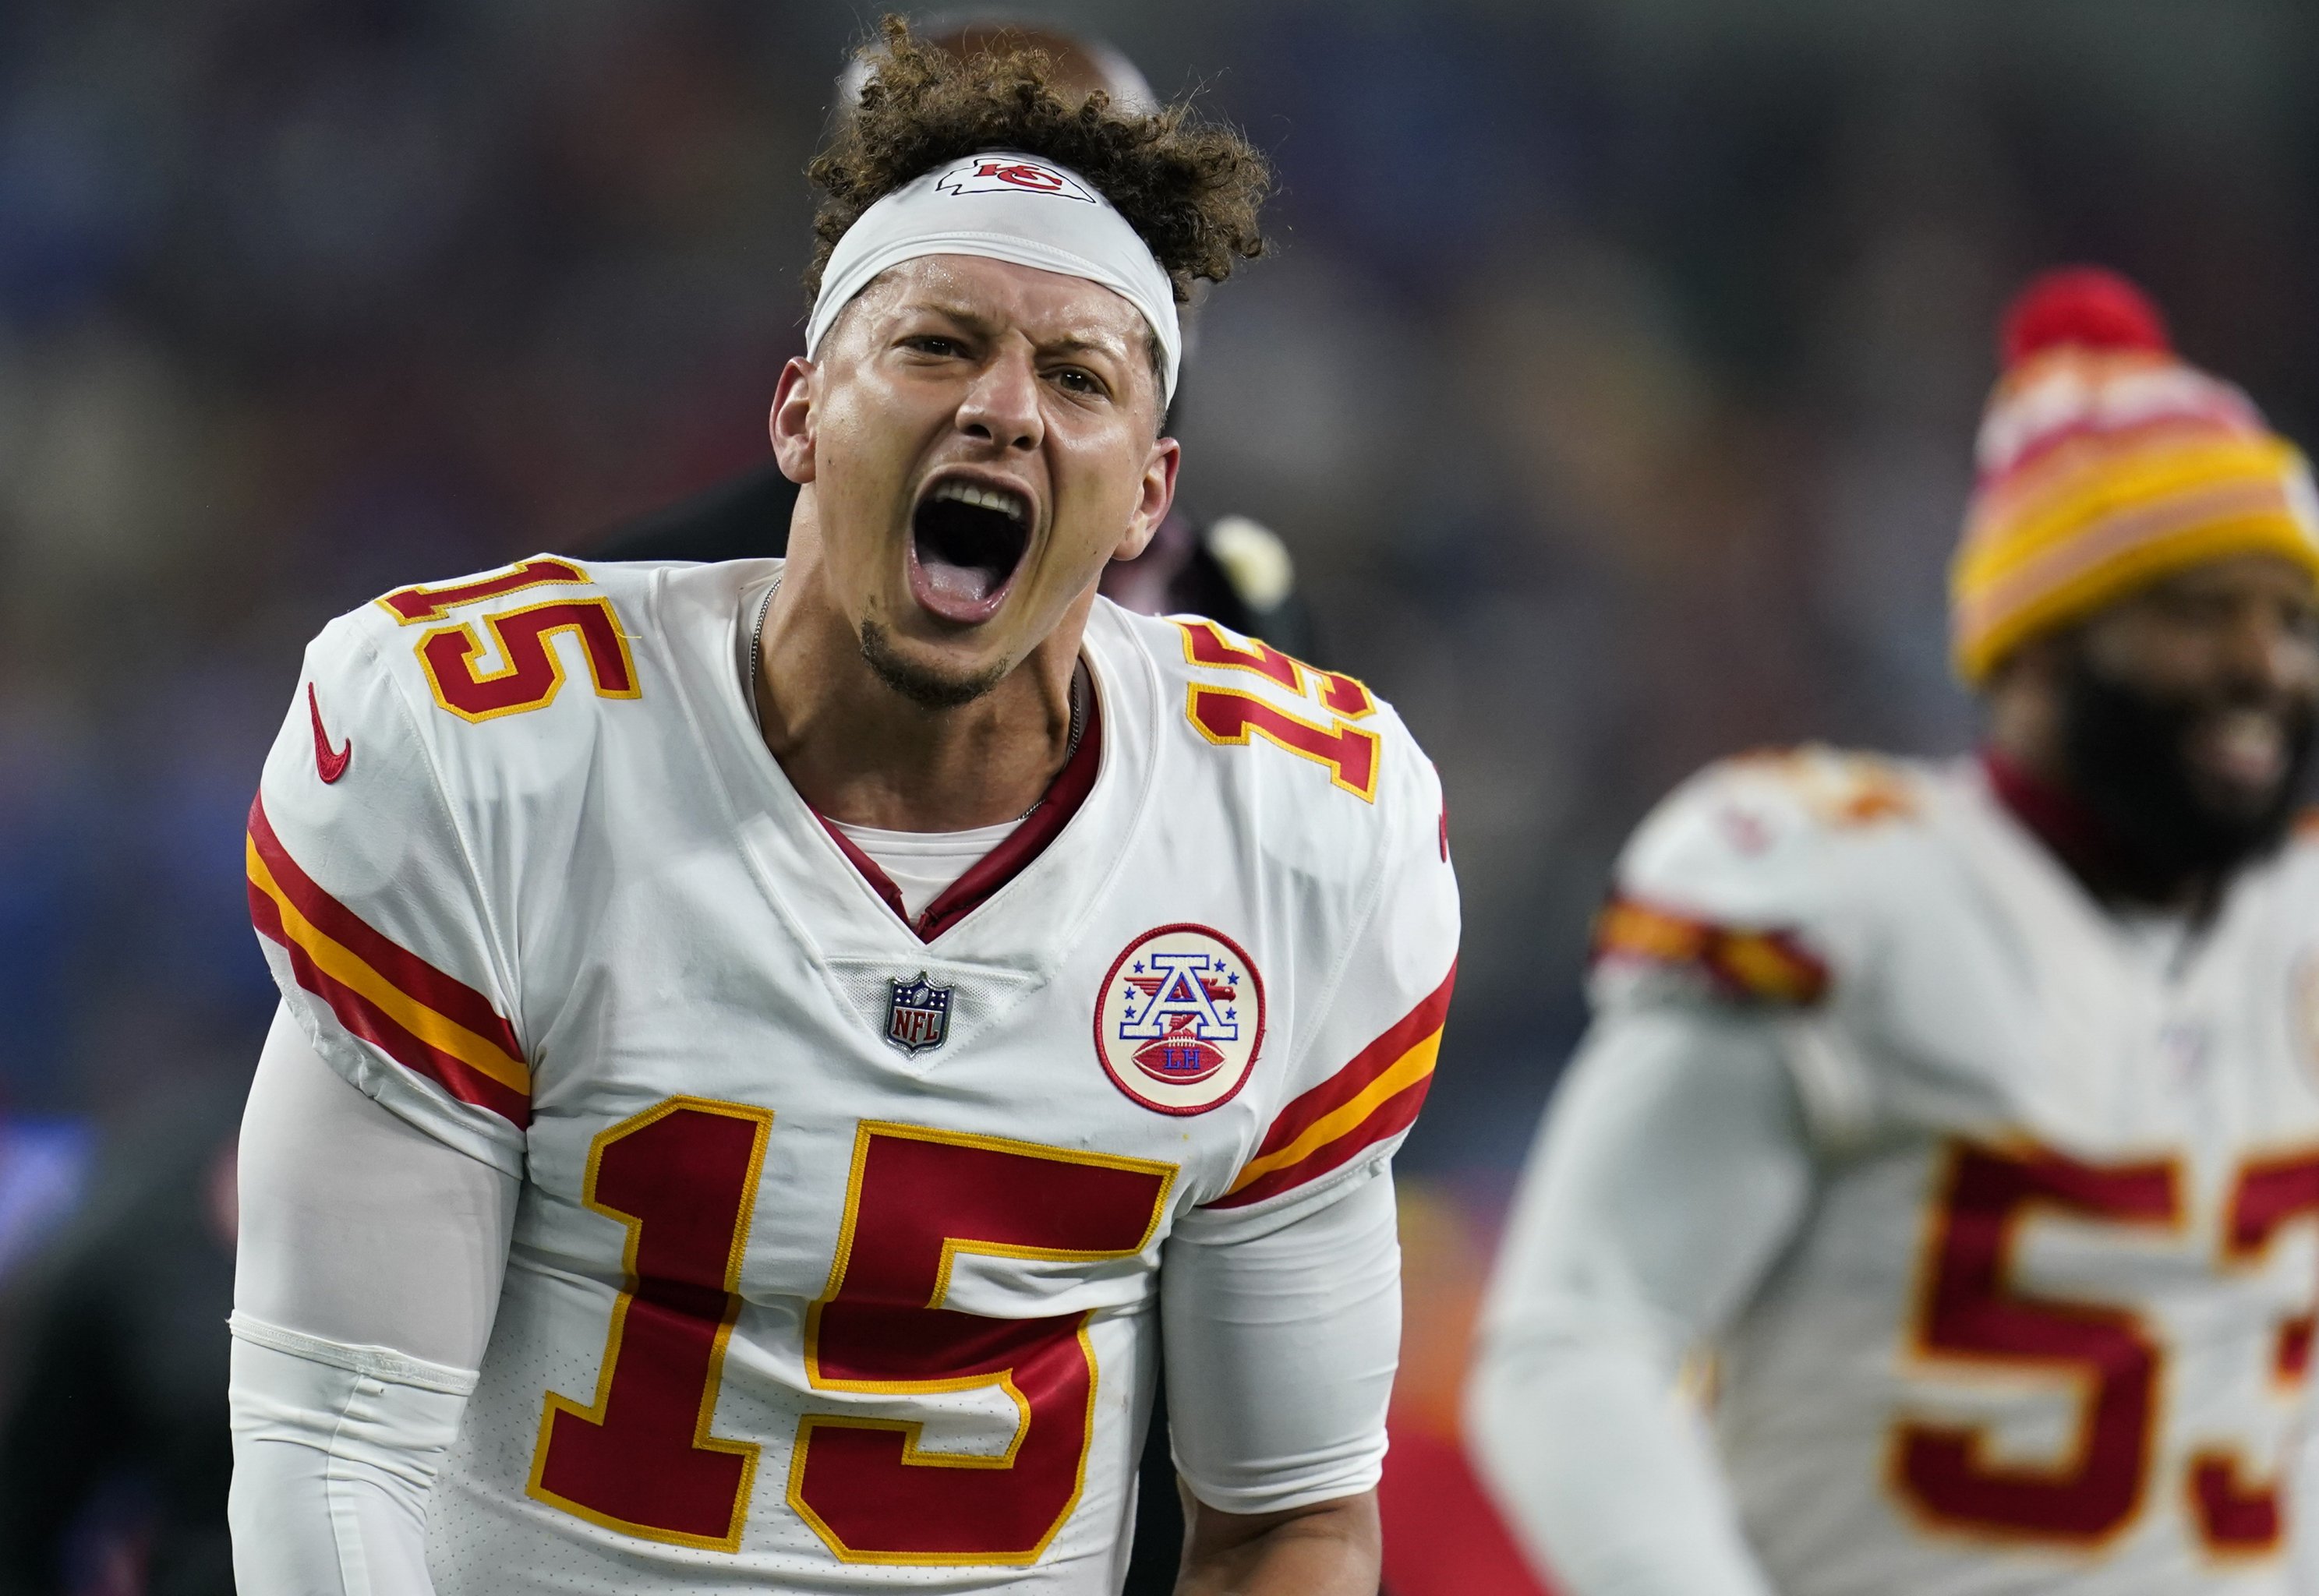 The Kansas City Chiefs are America's second favorite team in NFL playoffs